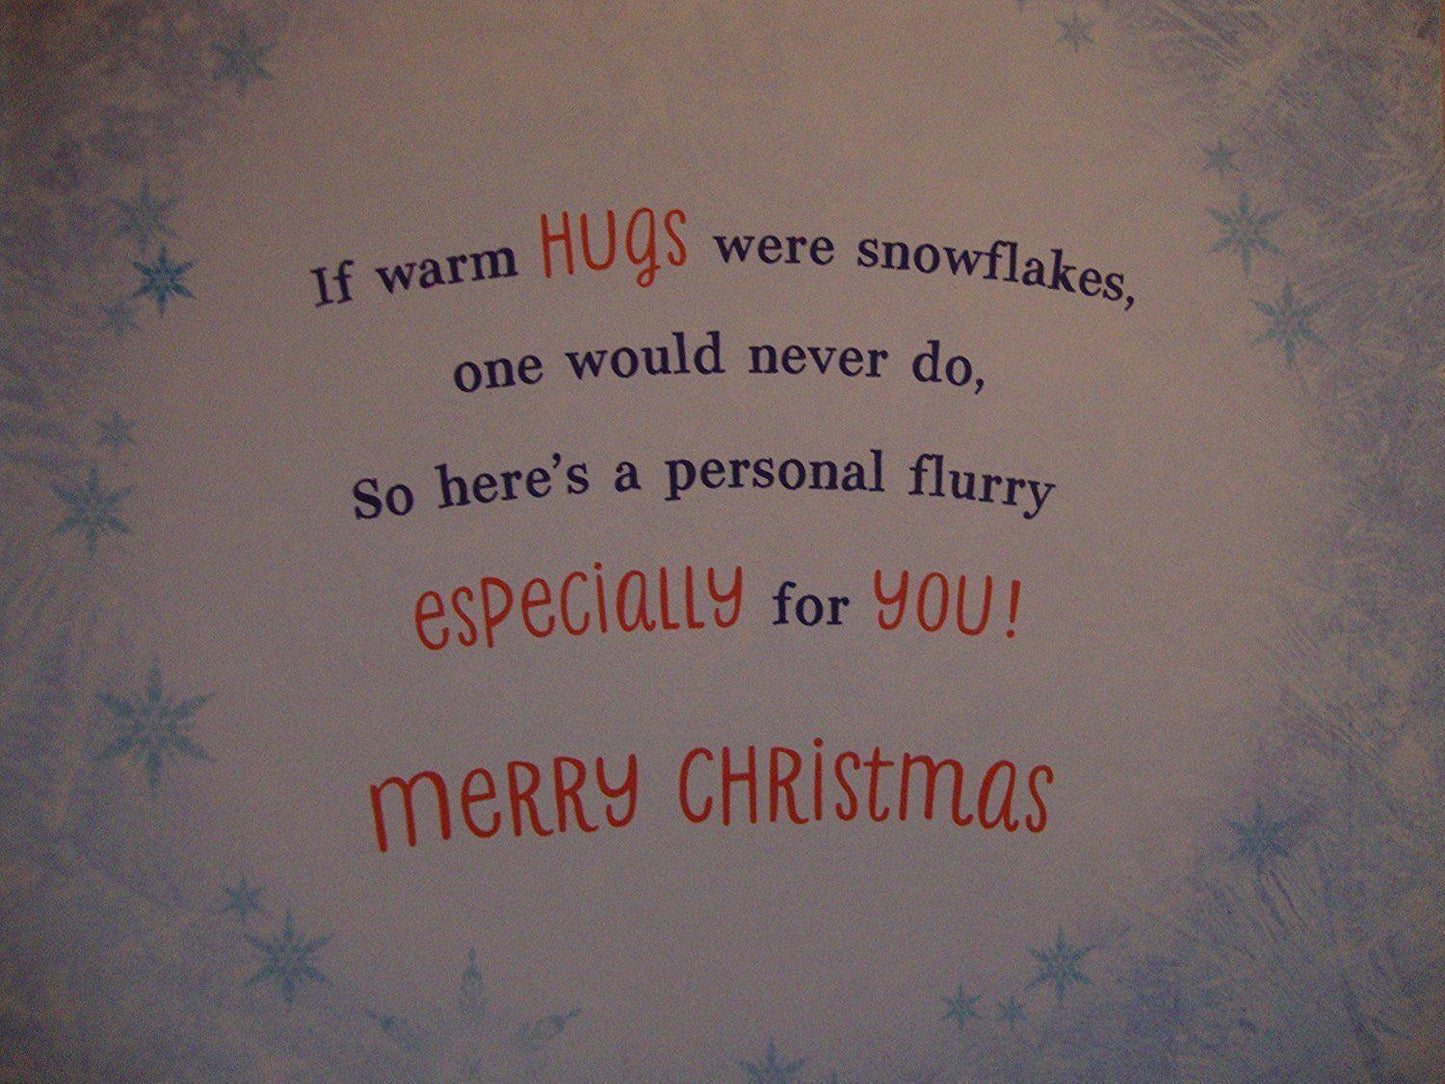 For Son Cool Little Hero Frozen Olaf Christmas Card 